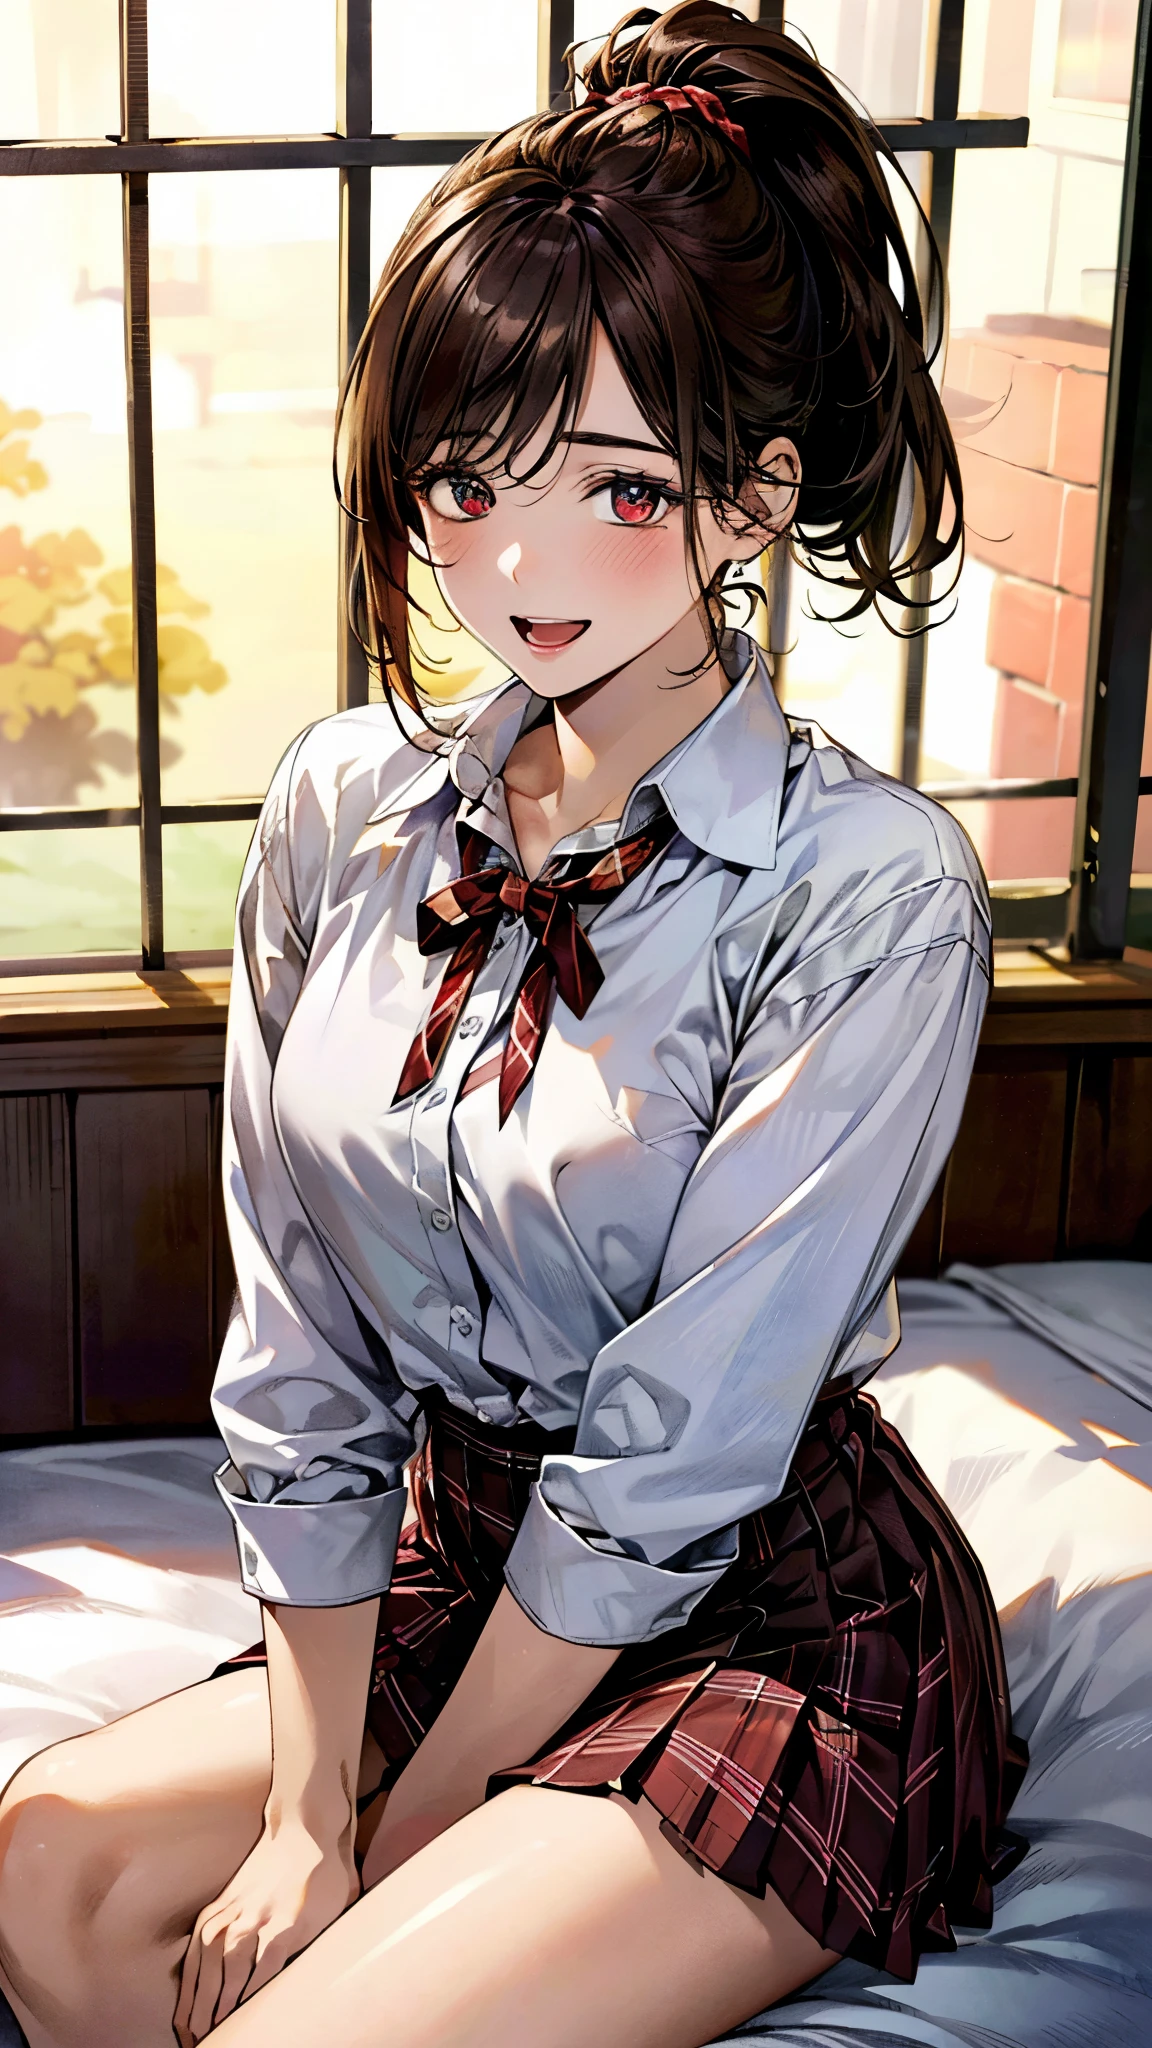 (masterpiece:1.3, top-quality, ultra high res, ultra detailed), (realistic, photorealistic:1.4), beautiful illustration, perfect lighting, natural lighting, colorful, depth of fields, 
beautiful detailed hair, beautiful detailed face, beautiful detailed eyes, beautiful clavicle, beautiful body, beautiful chest, beautiful thigh, beautiful legs, beautiful fingers, 
looking at viewer, front view:0.6. 1 girl, japanese, high school girl, perfect face, (perfect anatomy, anatomically correct), cute and symmetrical face, babyface, , shiny skin, 
(short hair:1.7, high ponytail:1.6, brown hair), crossed bangs, dark brown eyes, slant eyes, long eye lasher, (medium breasts), slender, 
(collared white shirt, dark red plaid pleated skirt, dark red neck ribbon), bottomless,
(beautiful scenery), evening, (room2), sitting bed, (hand in hair), (seductive smile, upper eyes, open mouth),